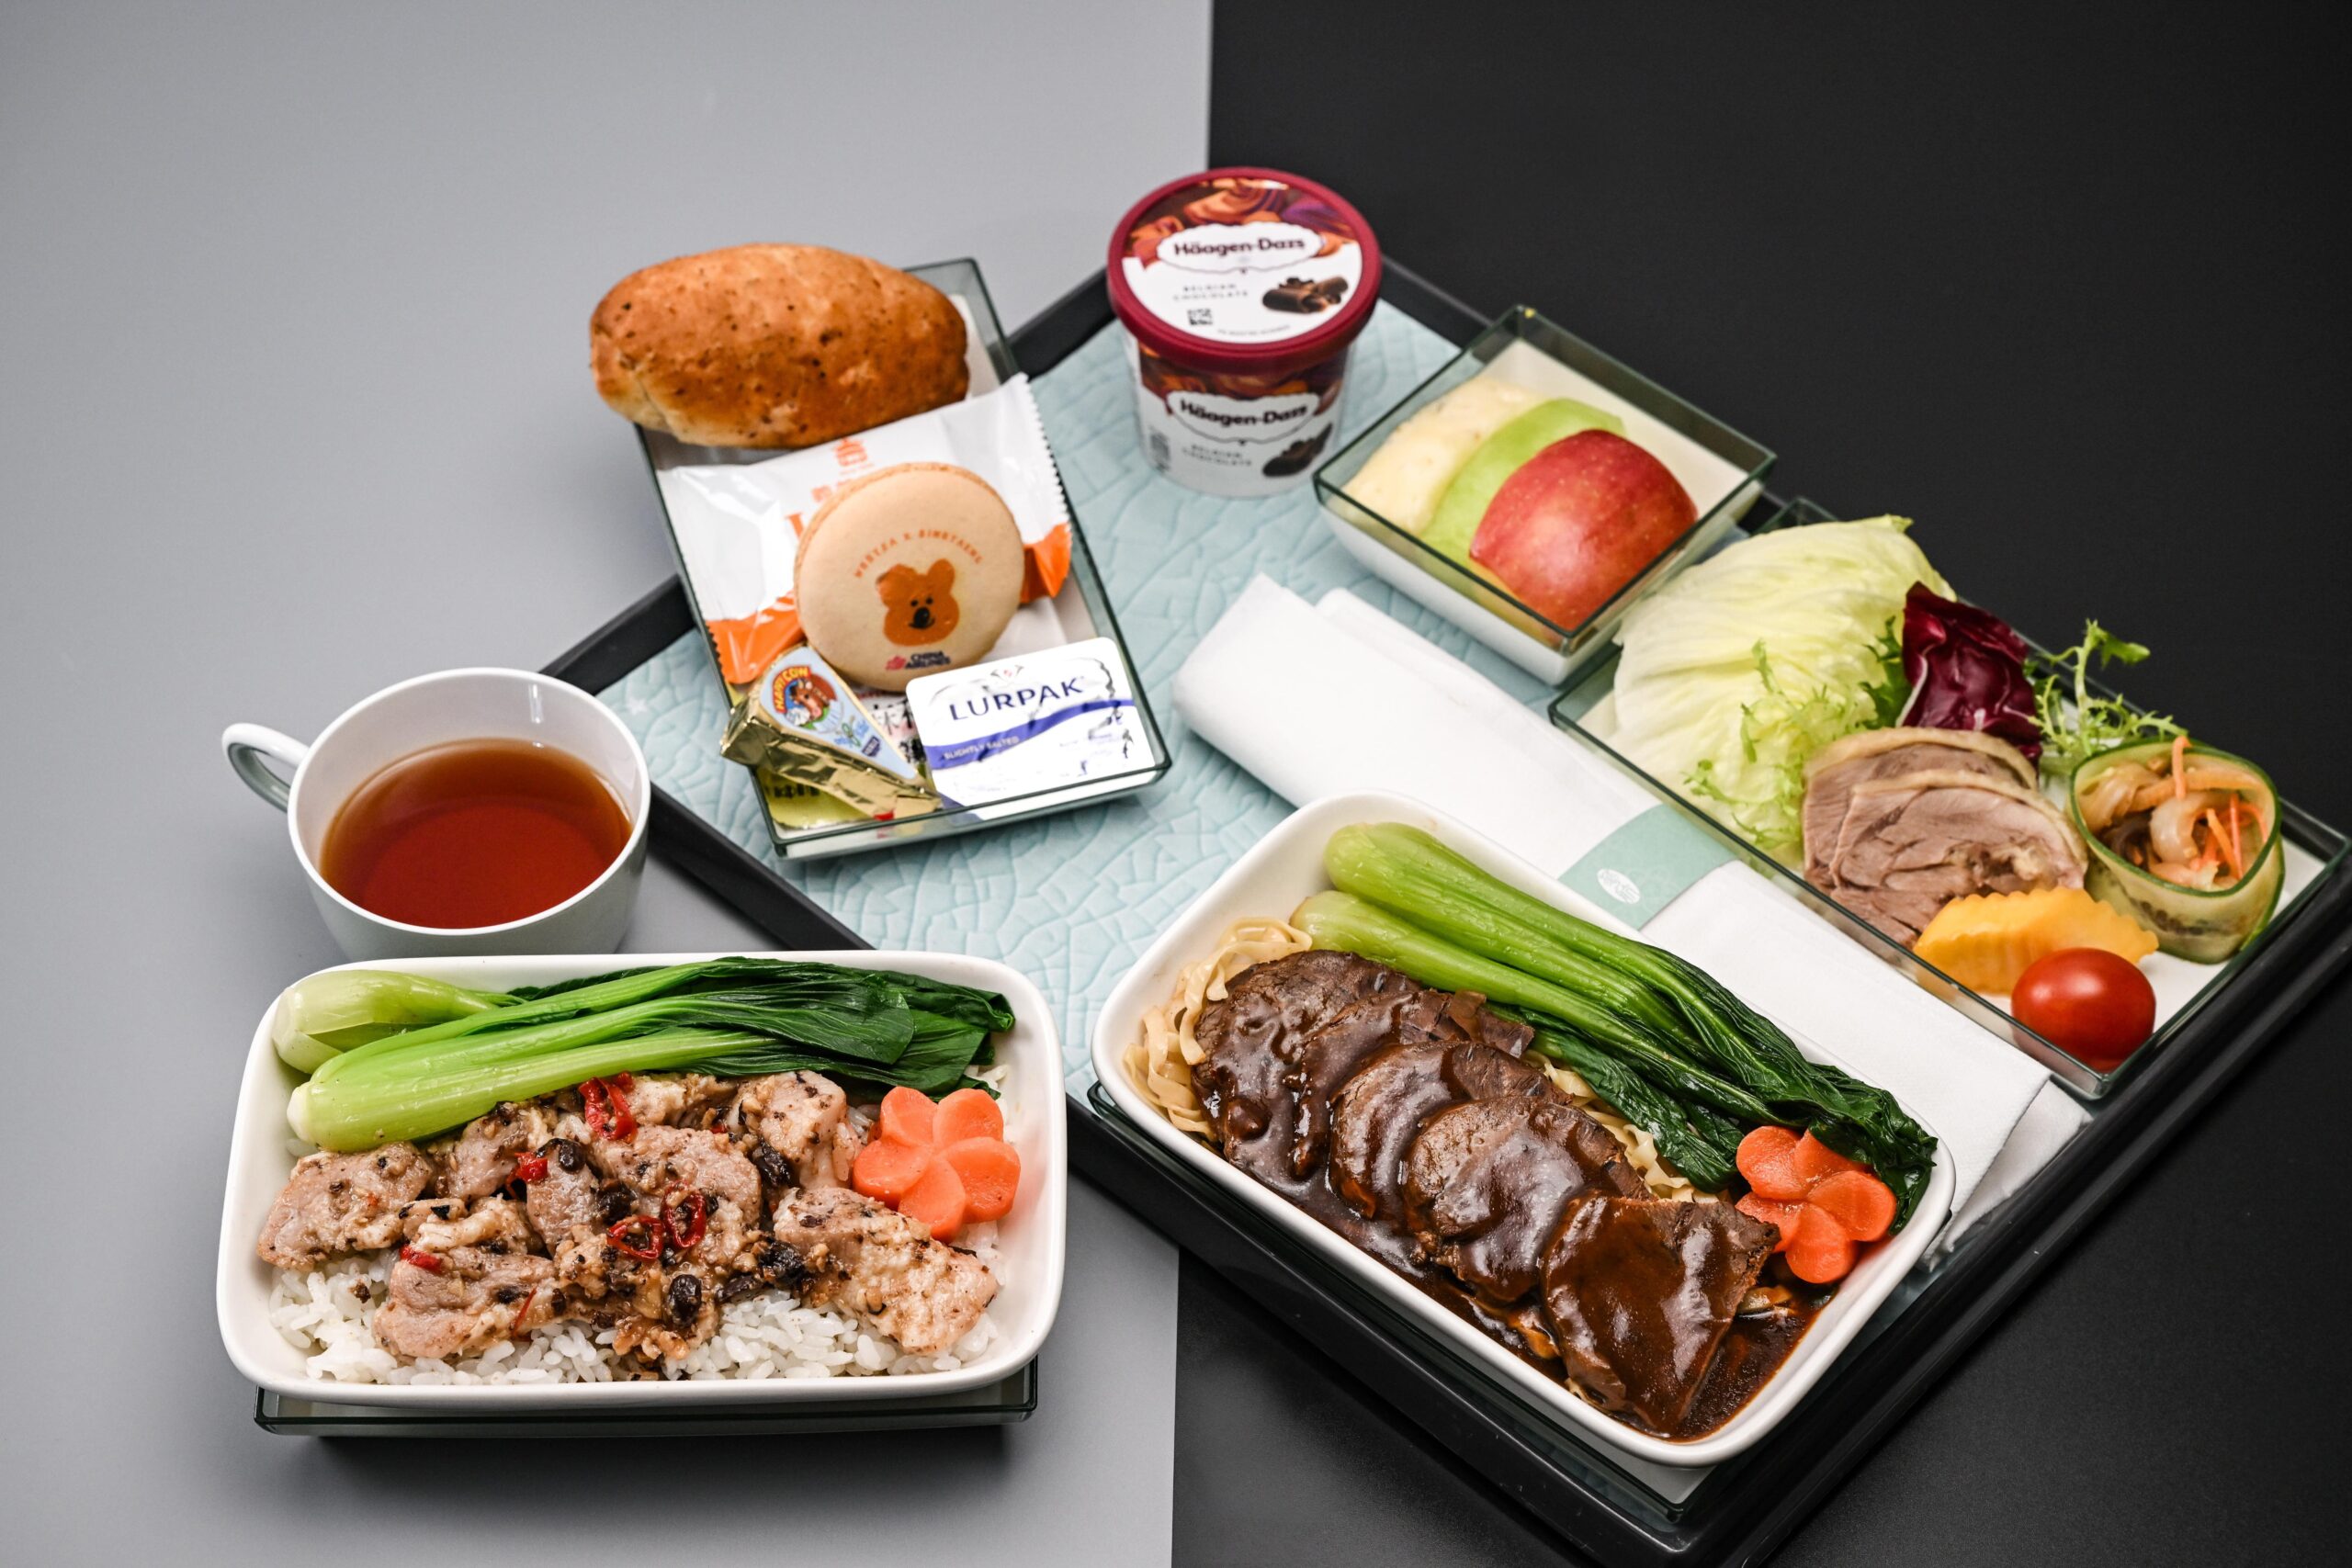 China Airlines introduces indulgent autumn seasonal menus prepared by leading restaurants from across the region.